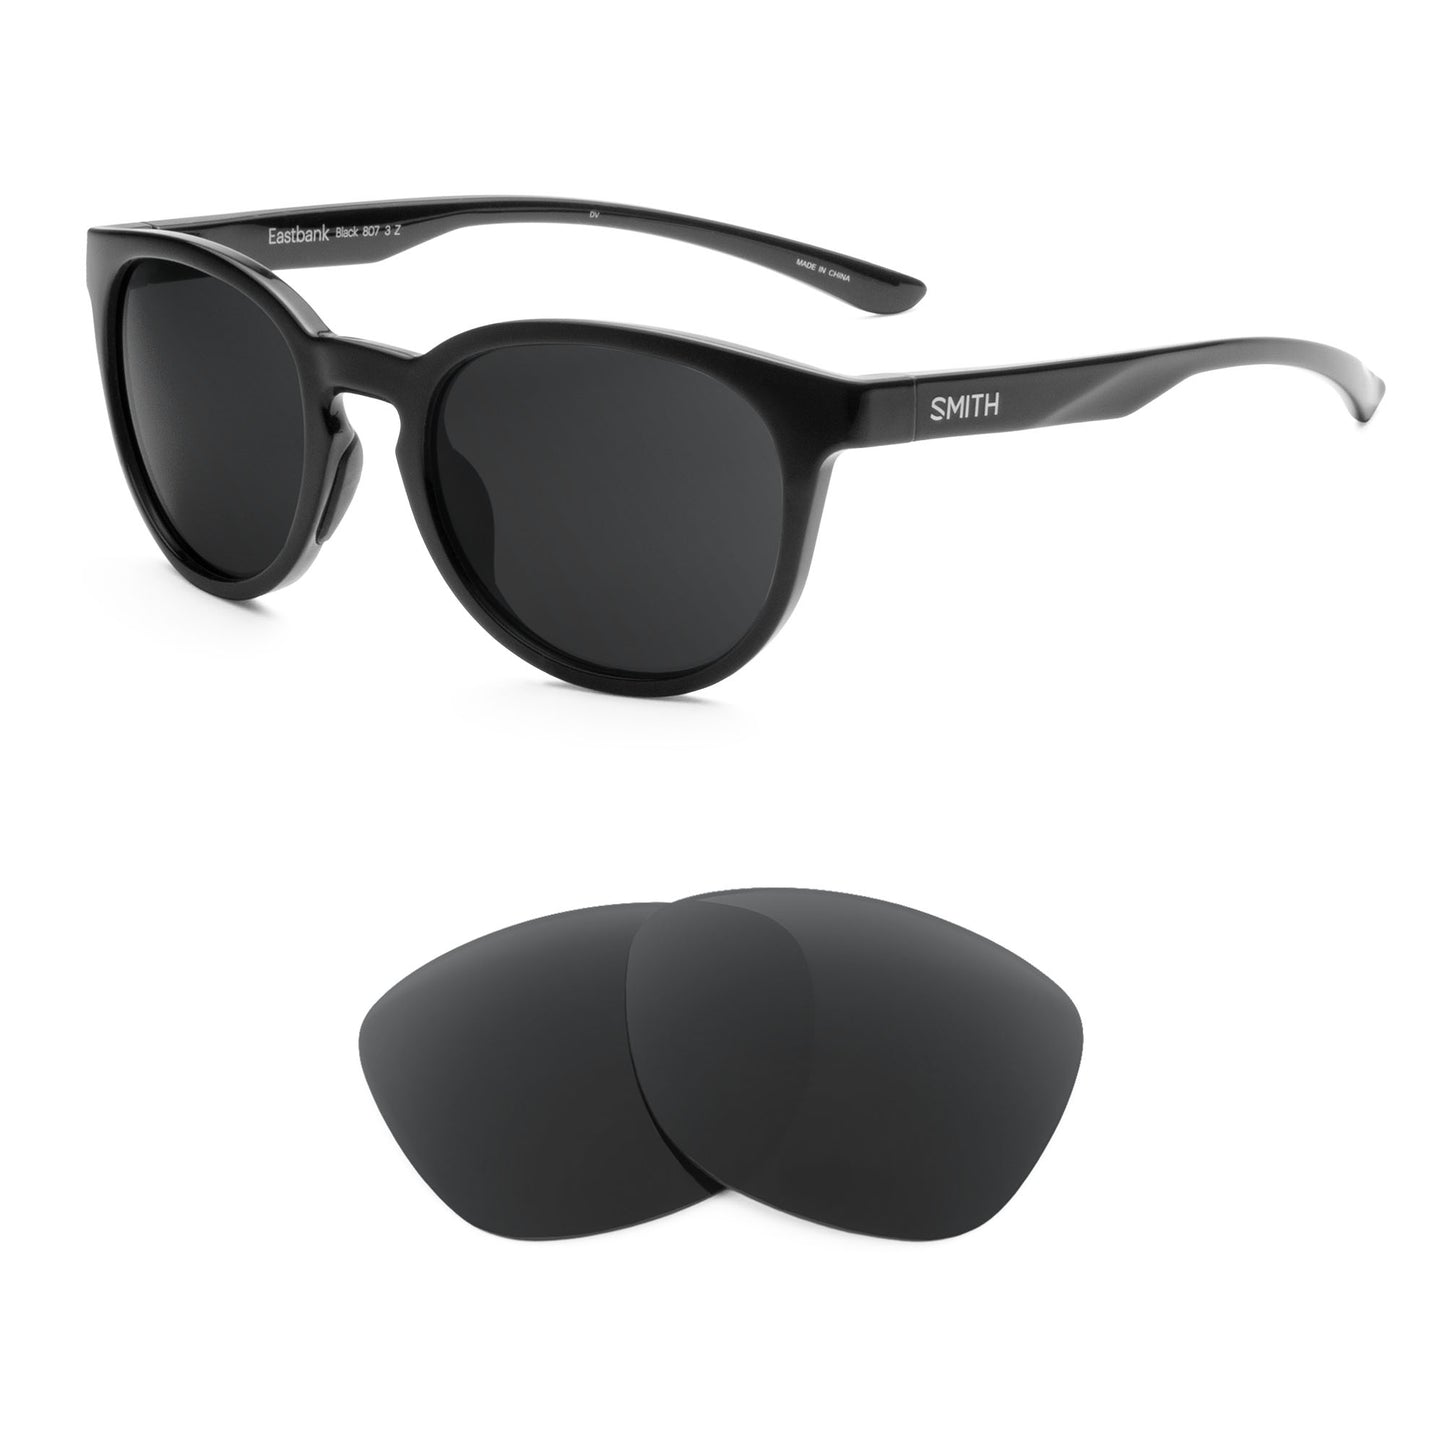 Smith Eastbank sunglasses with replacement lenses